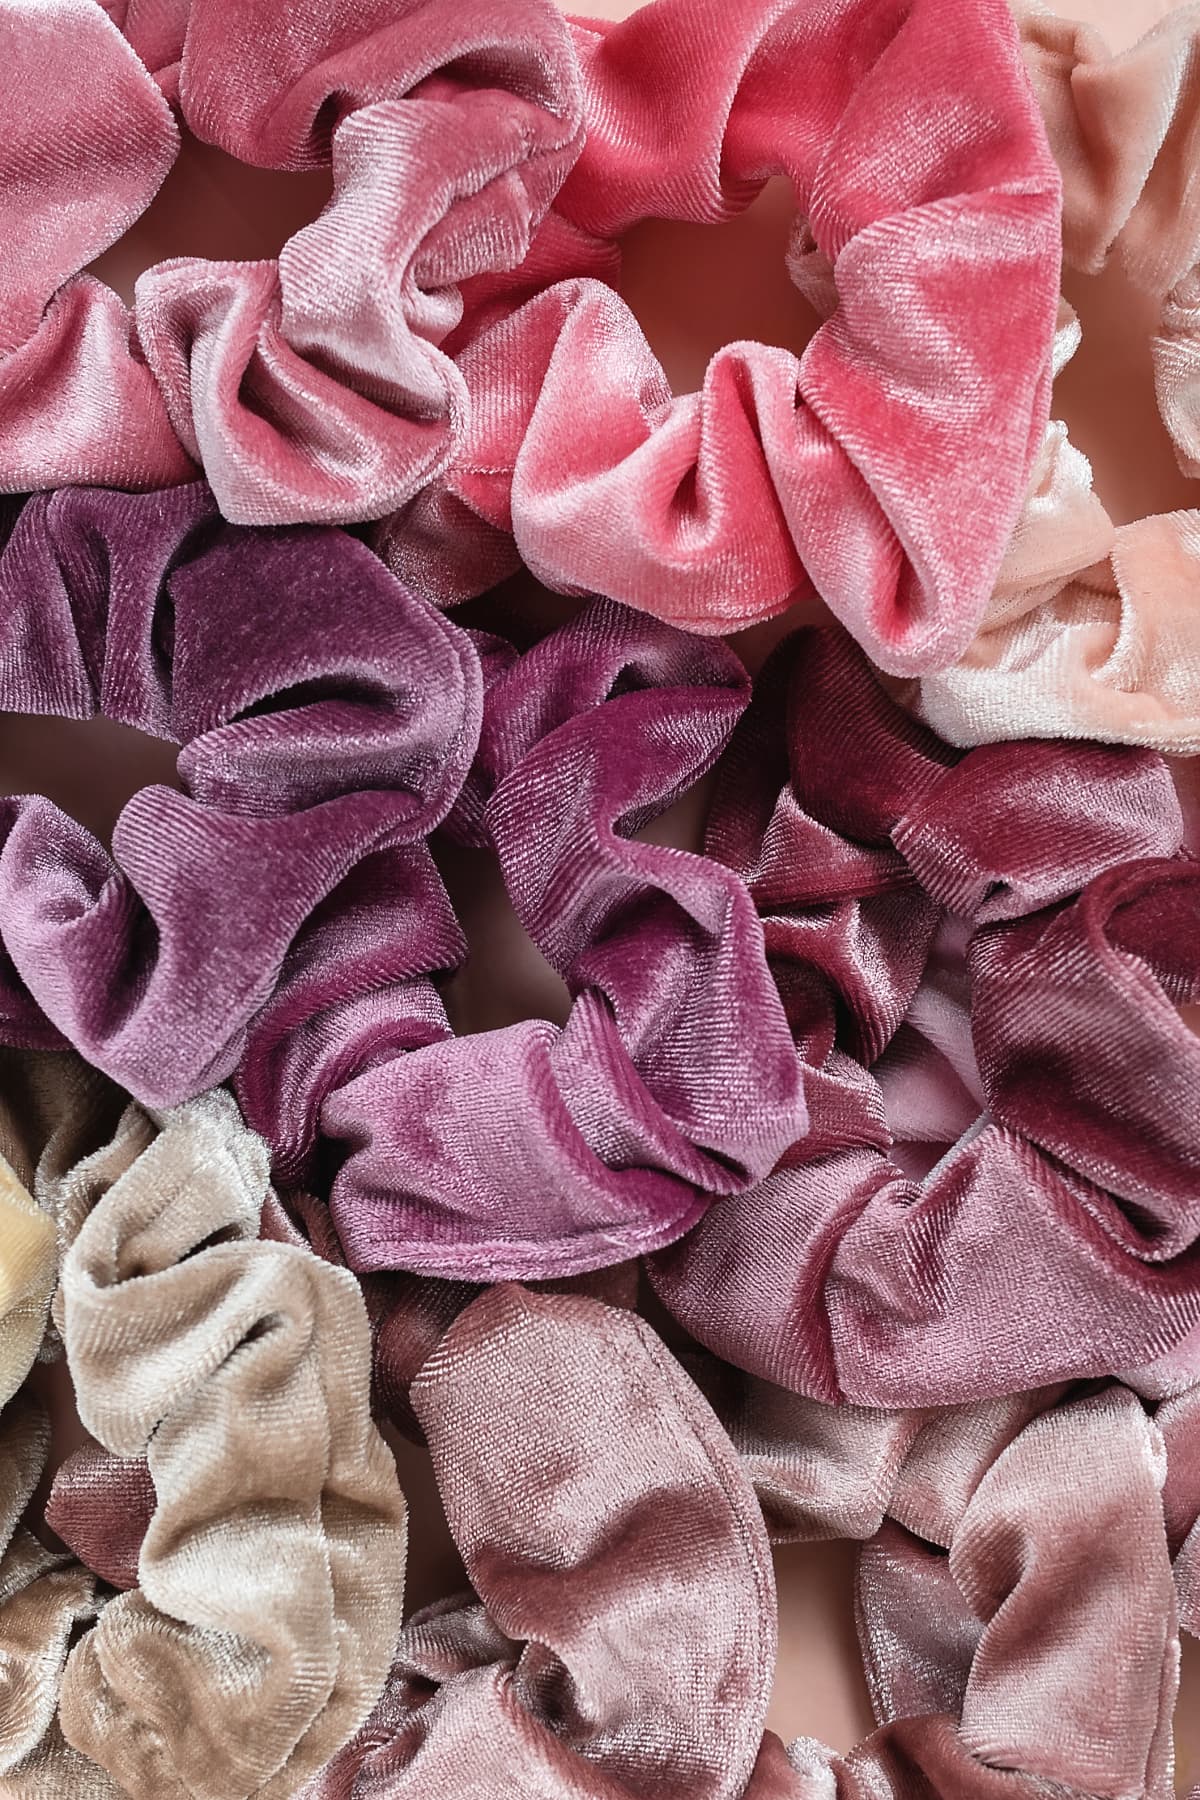 Several velour scrunchies in different colors